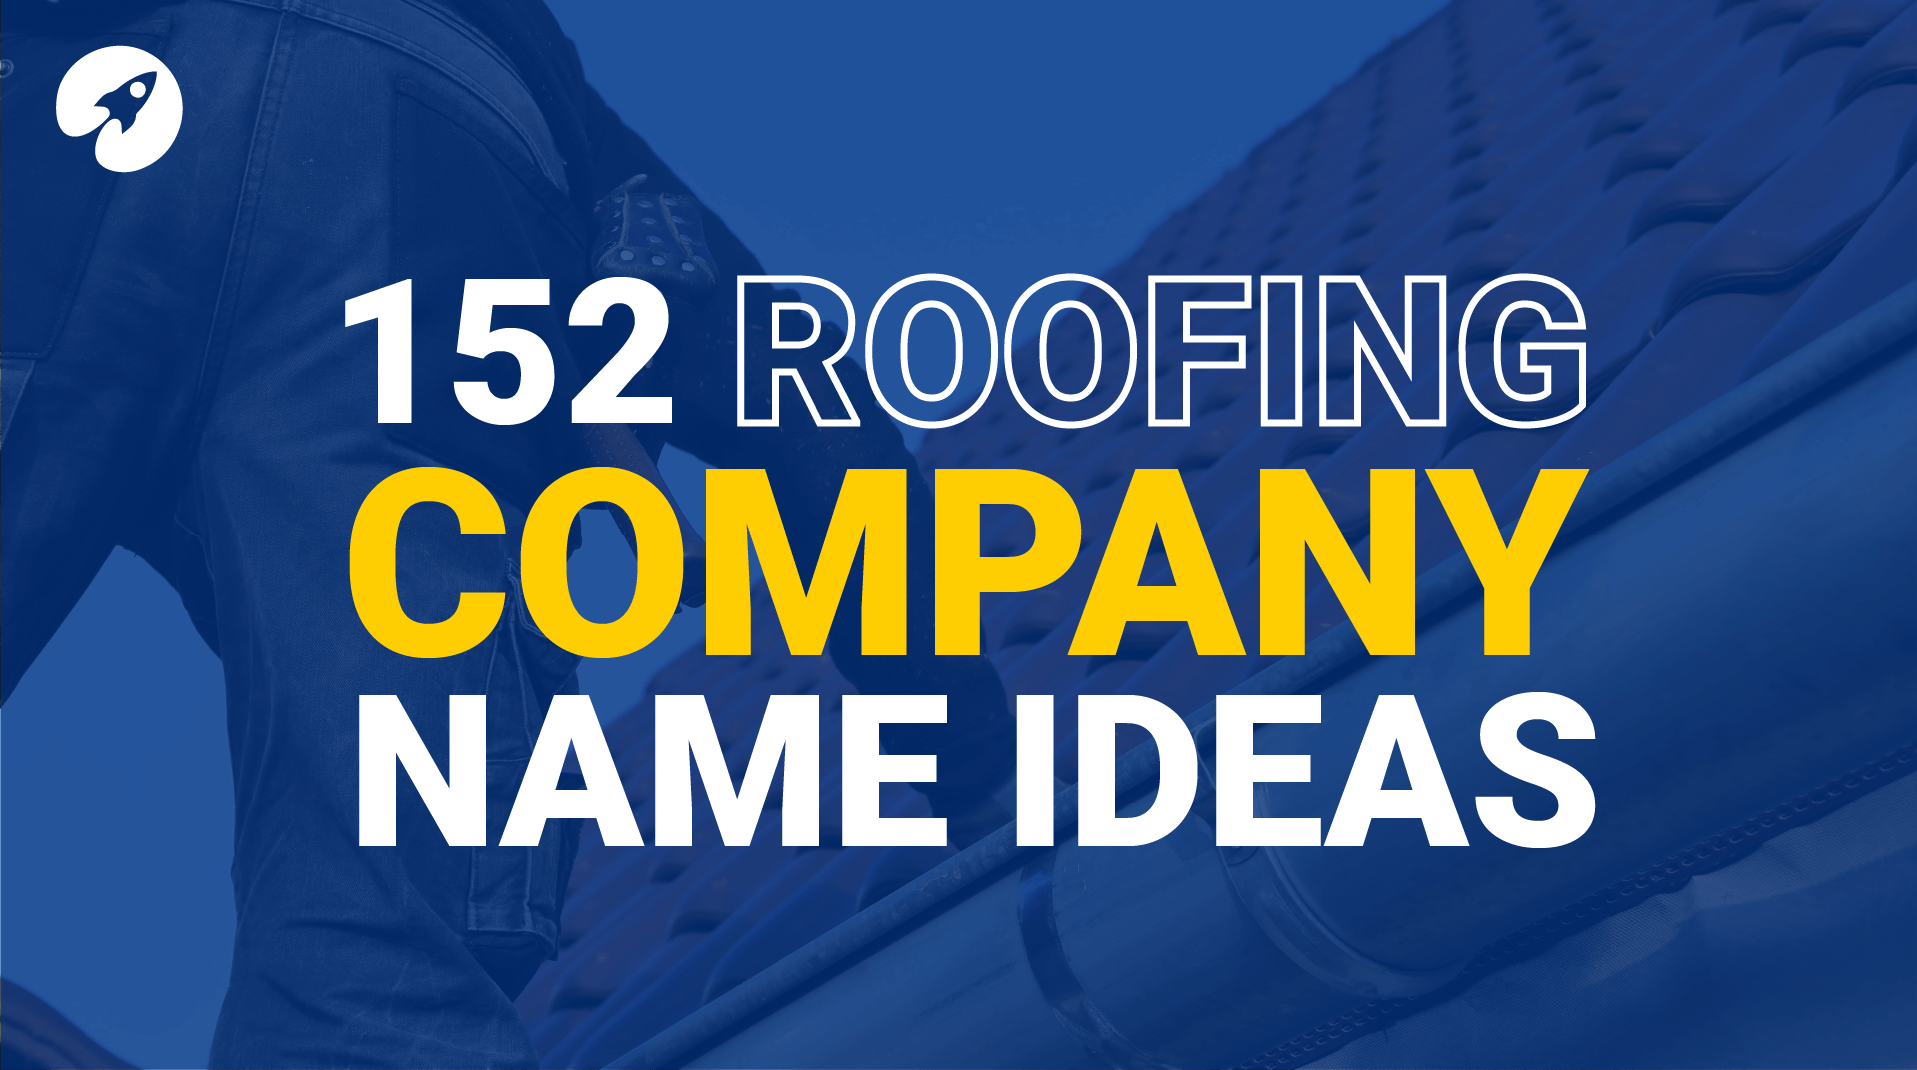 152 Roofing company name ideas